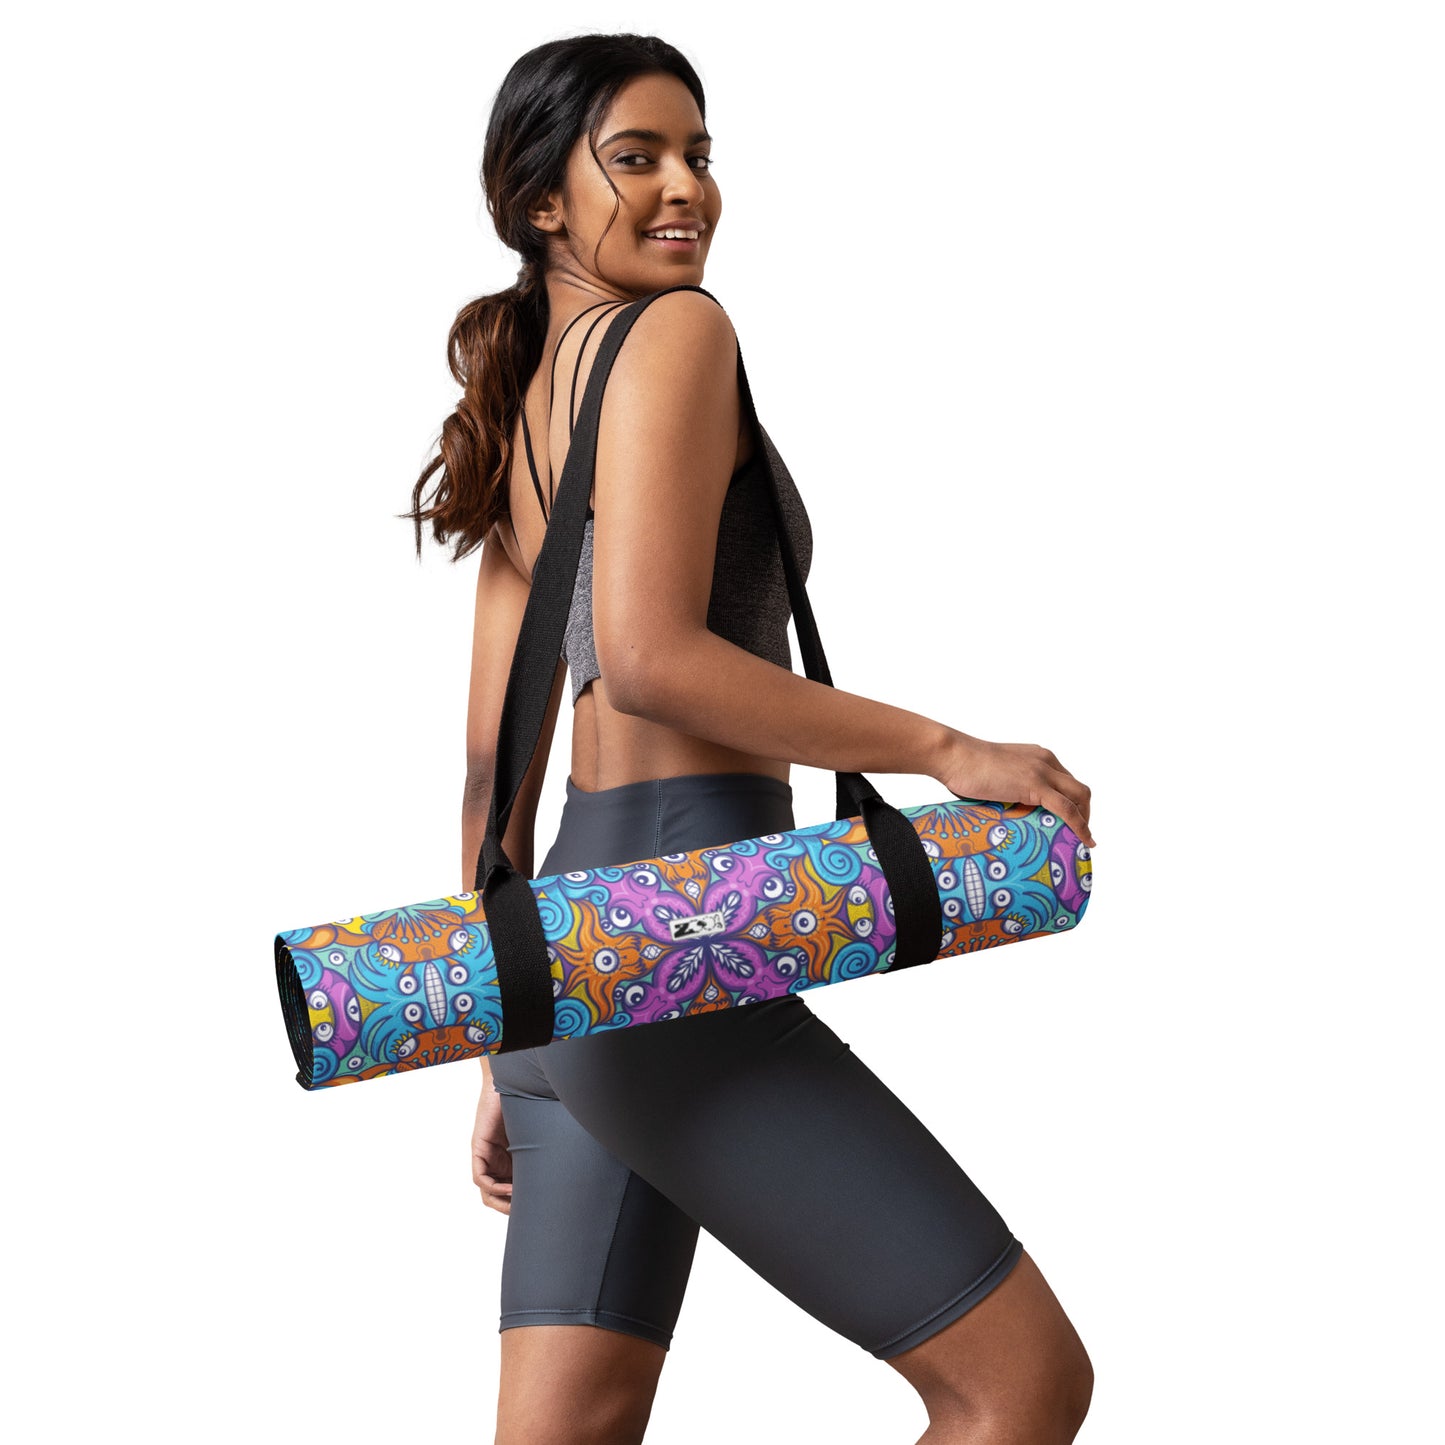 The ultimate sea beasts cast from the deep end of the ocean - Yoga mat. Lifestyle